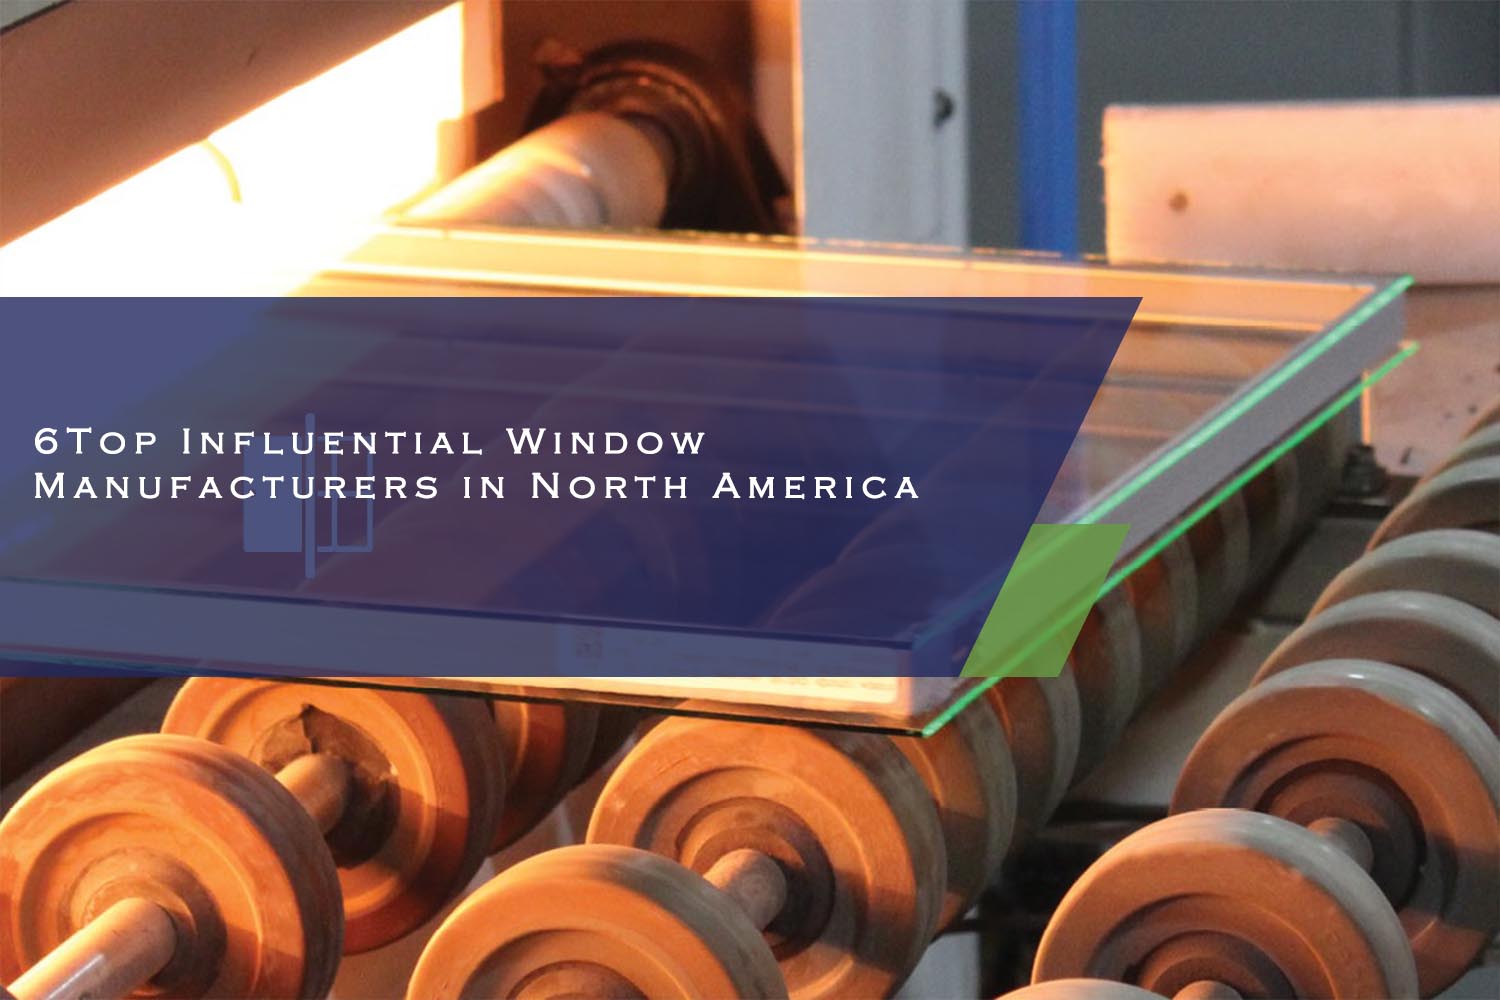 6 Top Influential Window Manufacturers in North America